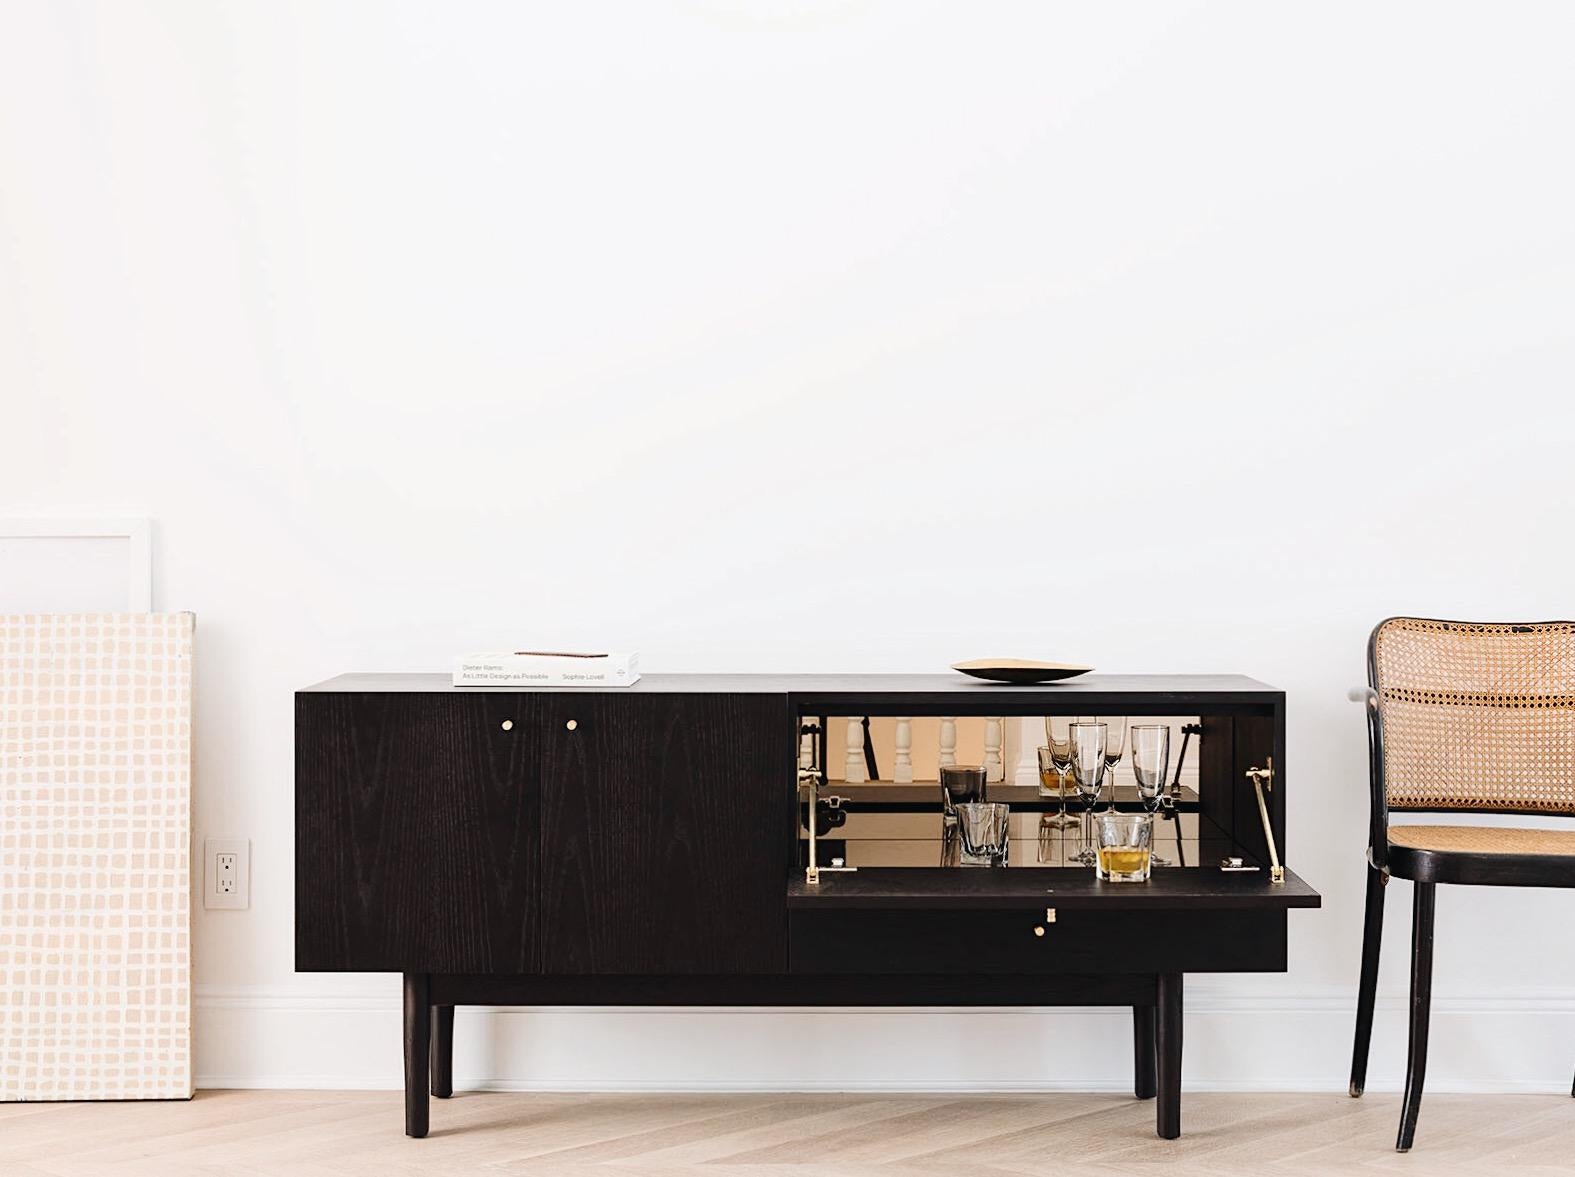 Inspired by the textural complexity of wood grain, the Rex sideboard is a celebration of organic character and clean, balanced line. Featuring machined brass pulls throughout, the left compartment includes two doors opening to an adjustable shelf